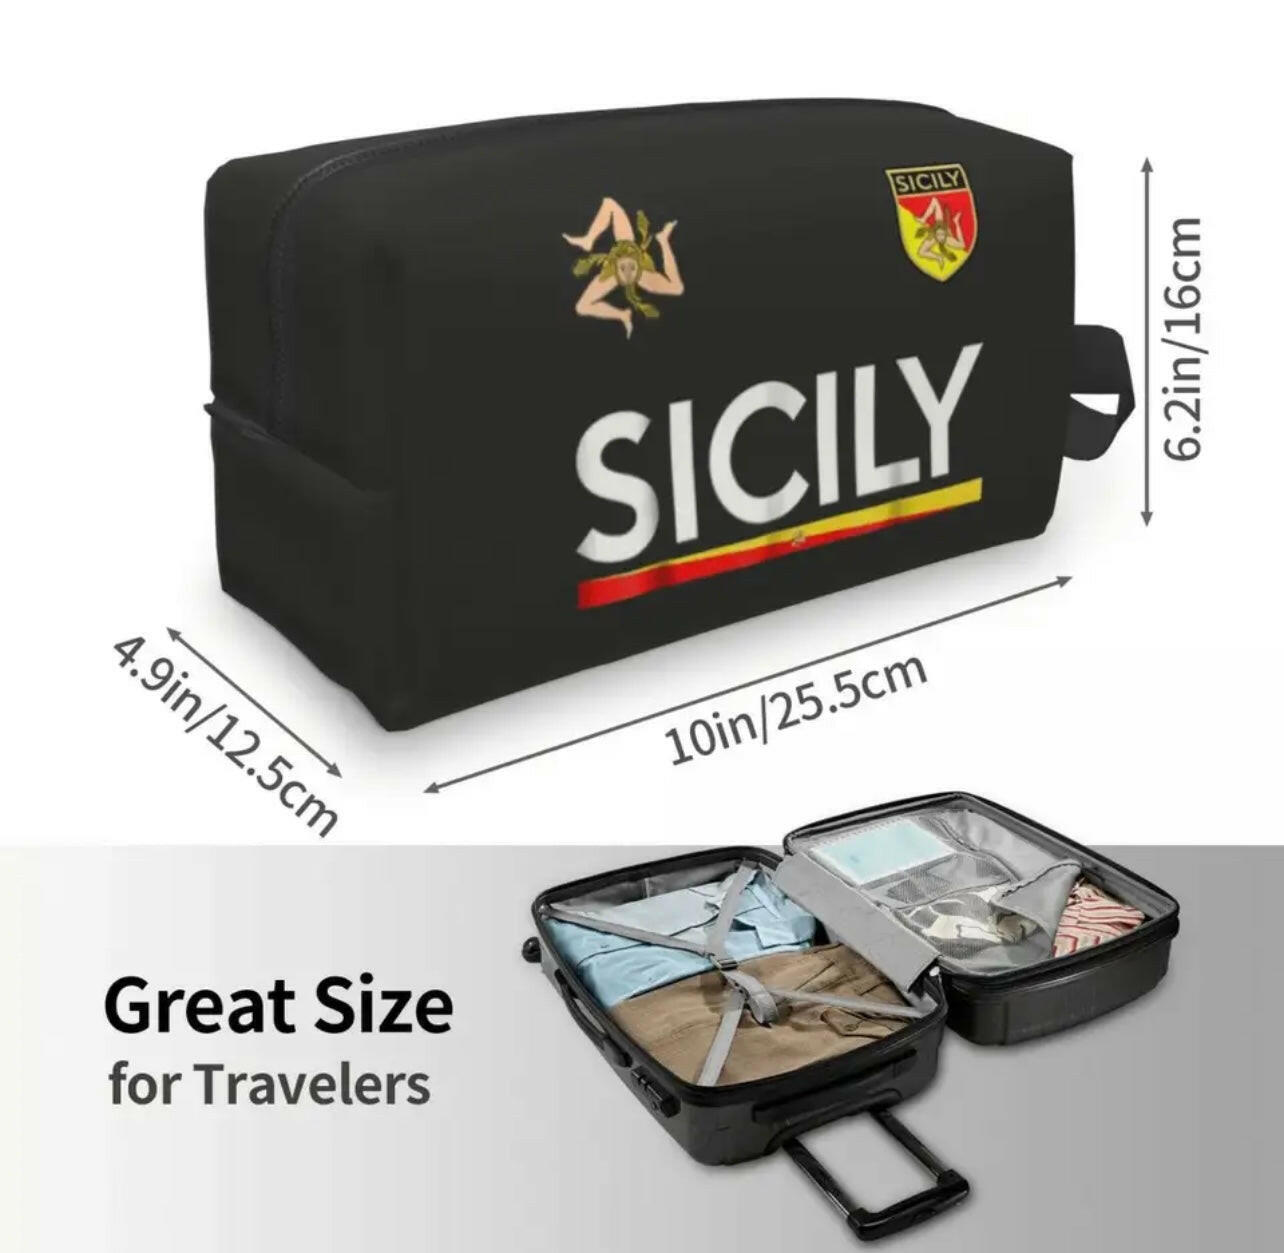 Sicily Large Cosmetic/Accessories Travel Bag.